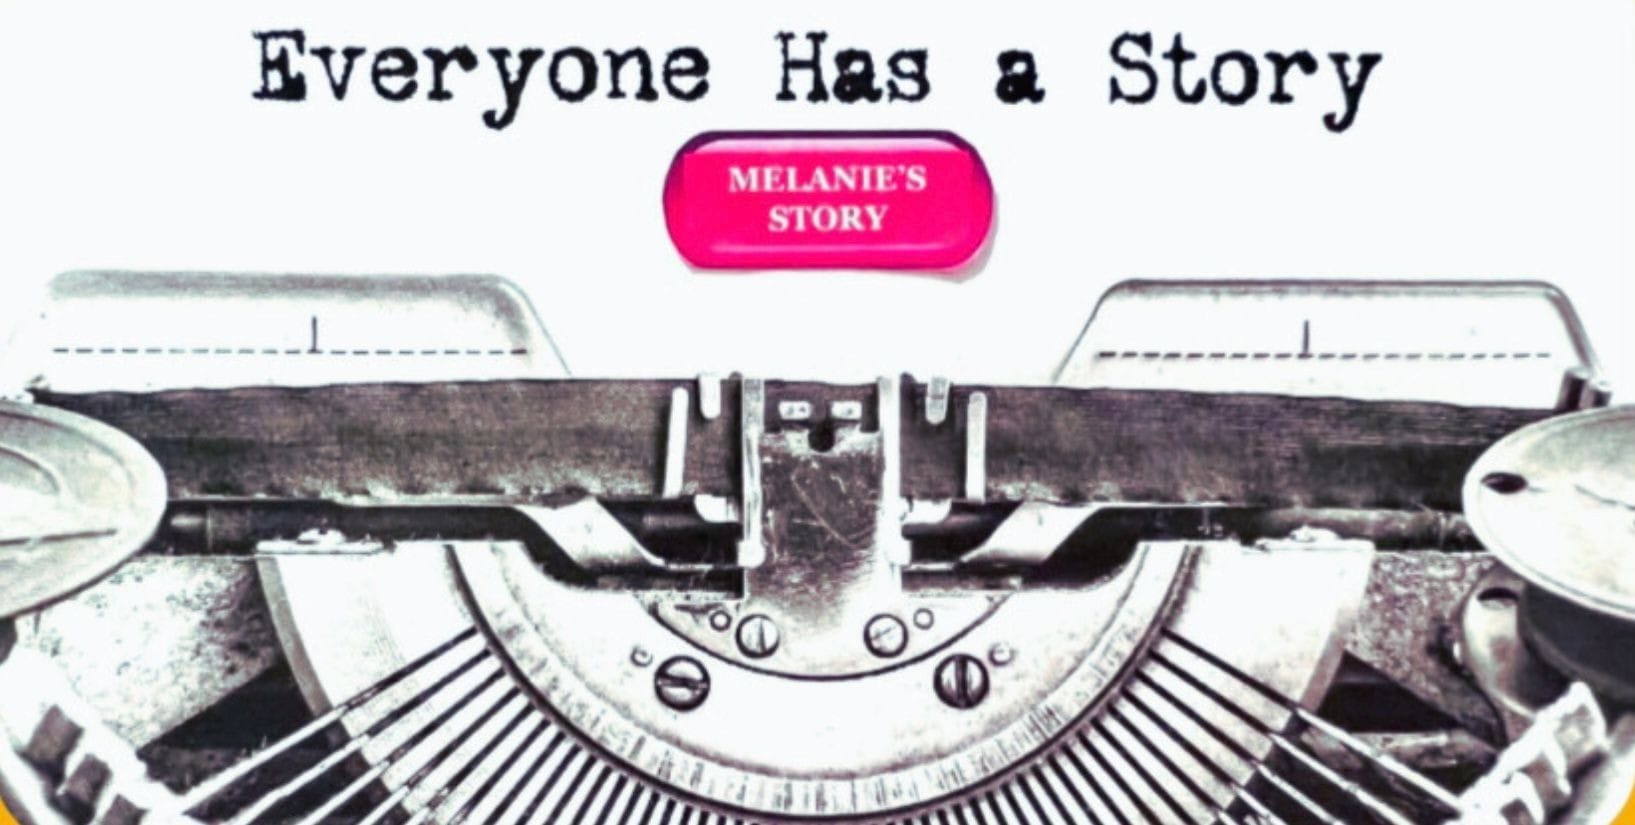 Melanie Gendron as a writer, typing on the typewriter the story of her life, as "Everyone  Has A Story. This is Melanie's story.